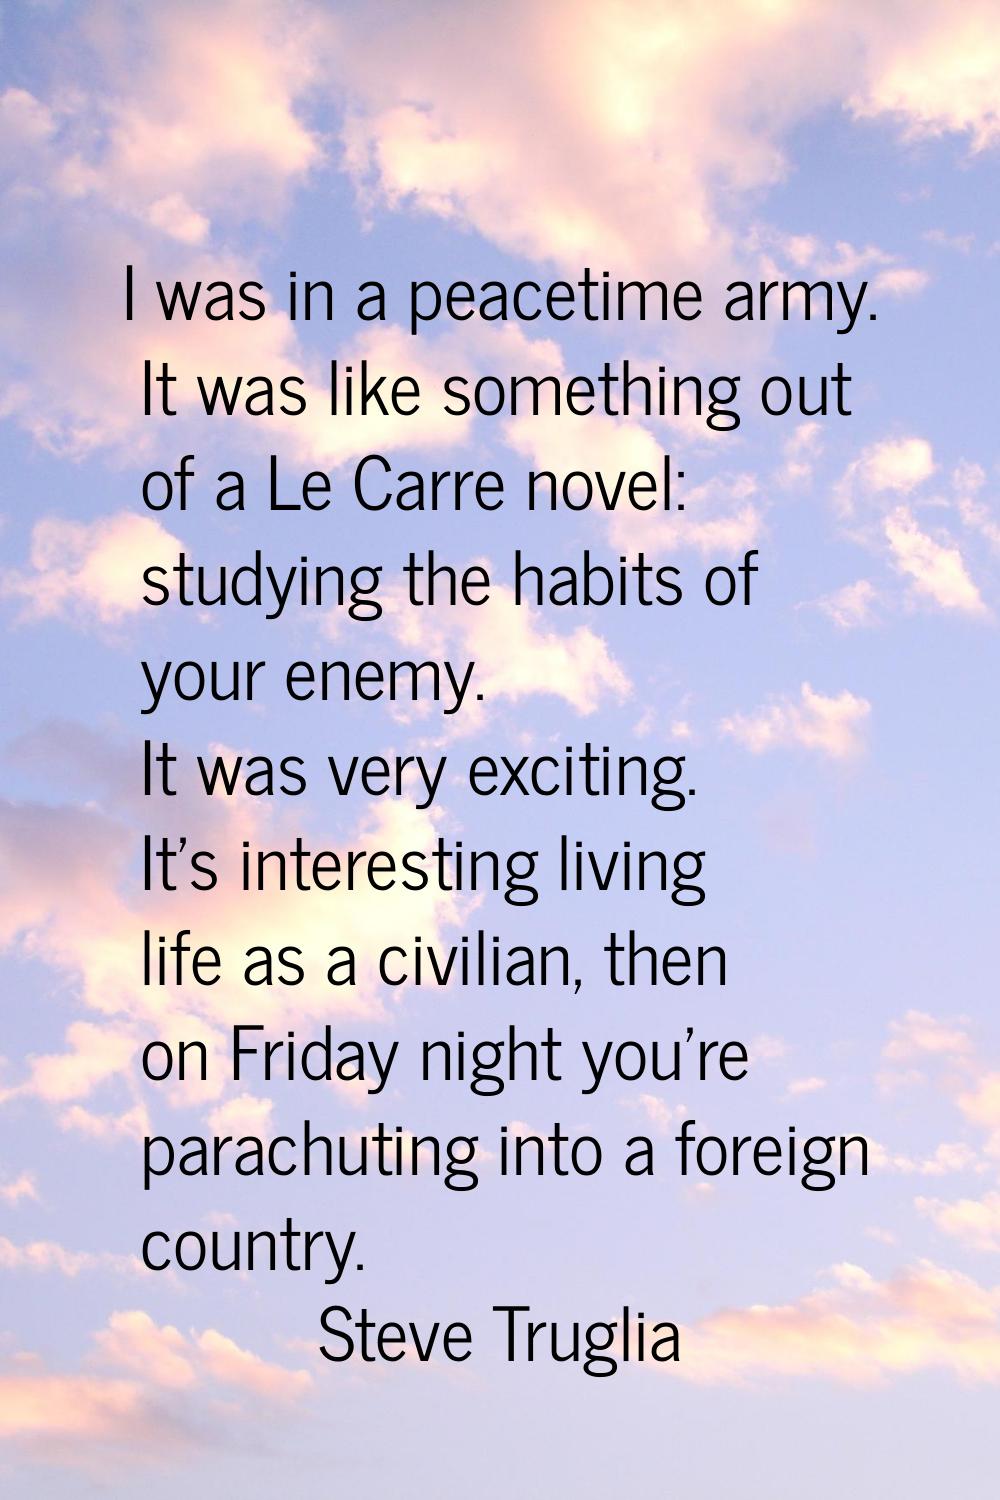 I was in a peacetime army. It was like something out of a Le Carre novel: studying the habits of yo